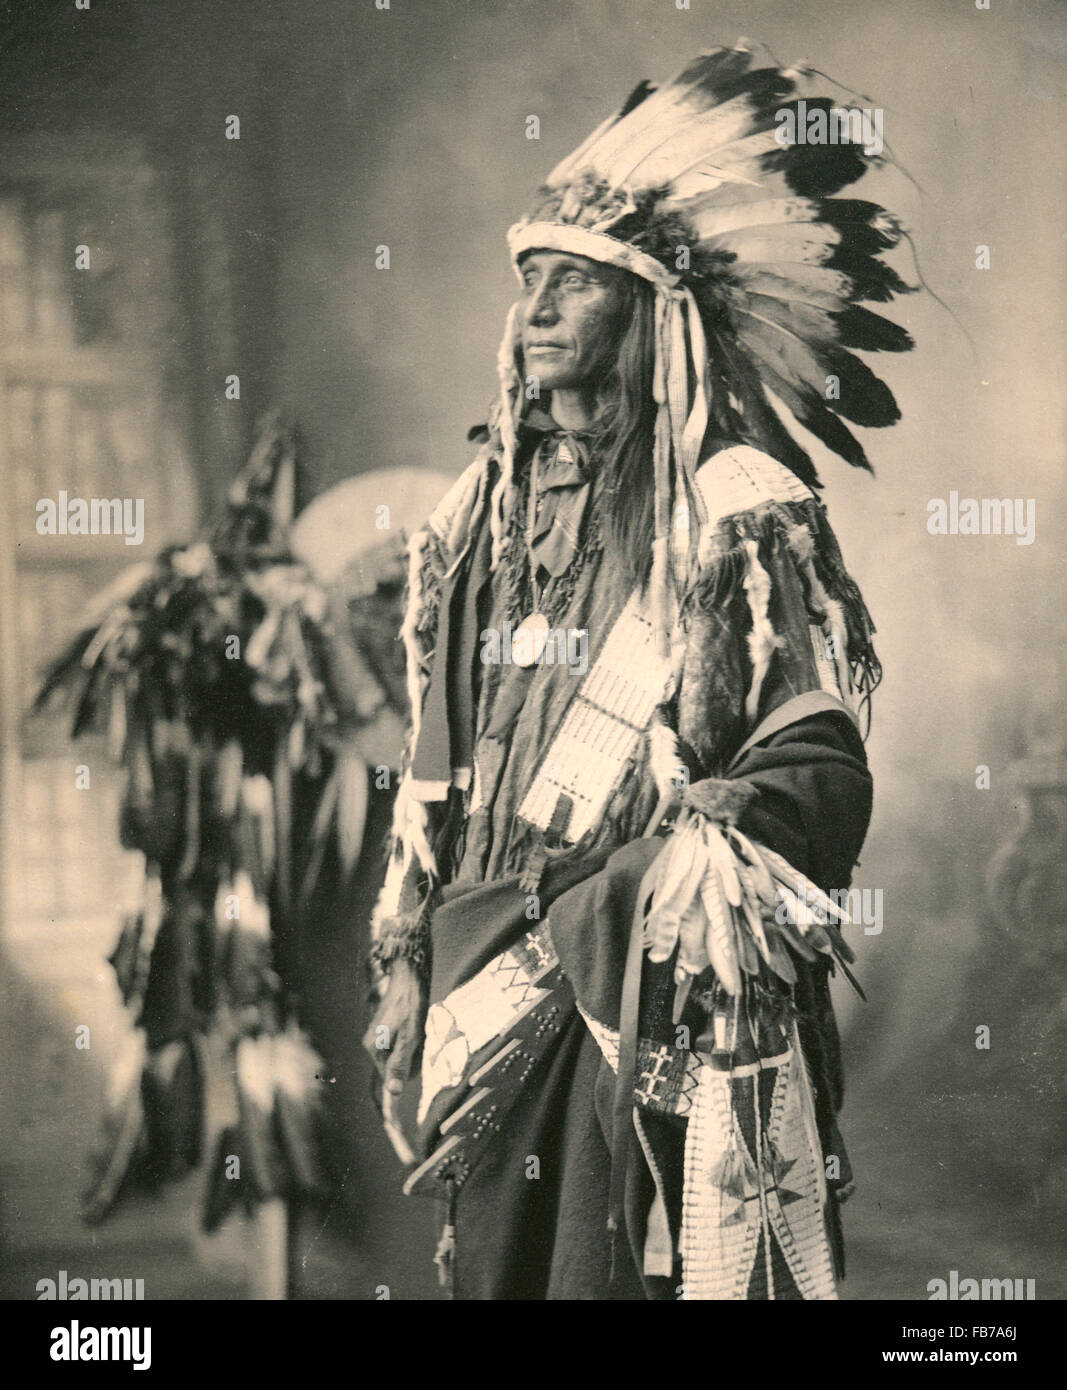 Native American Indian Povero Cane Indiani Sioux Foto Stock Alamy